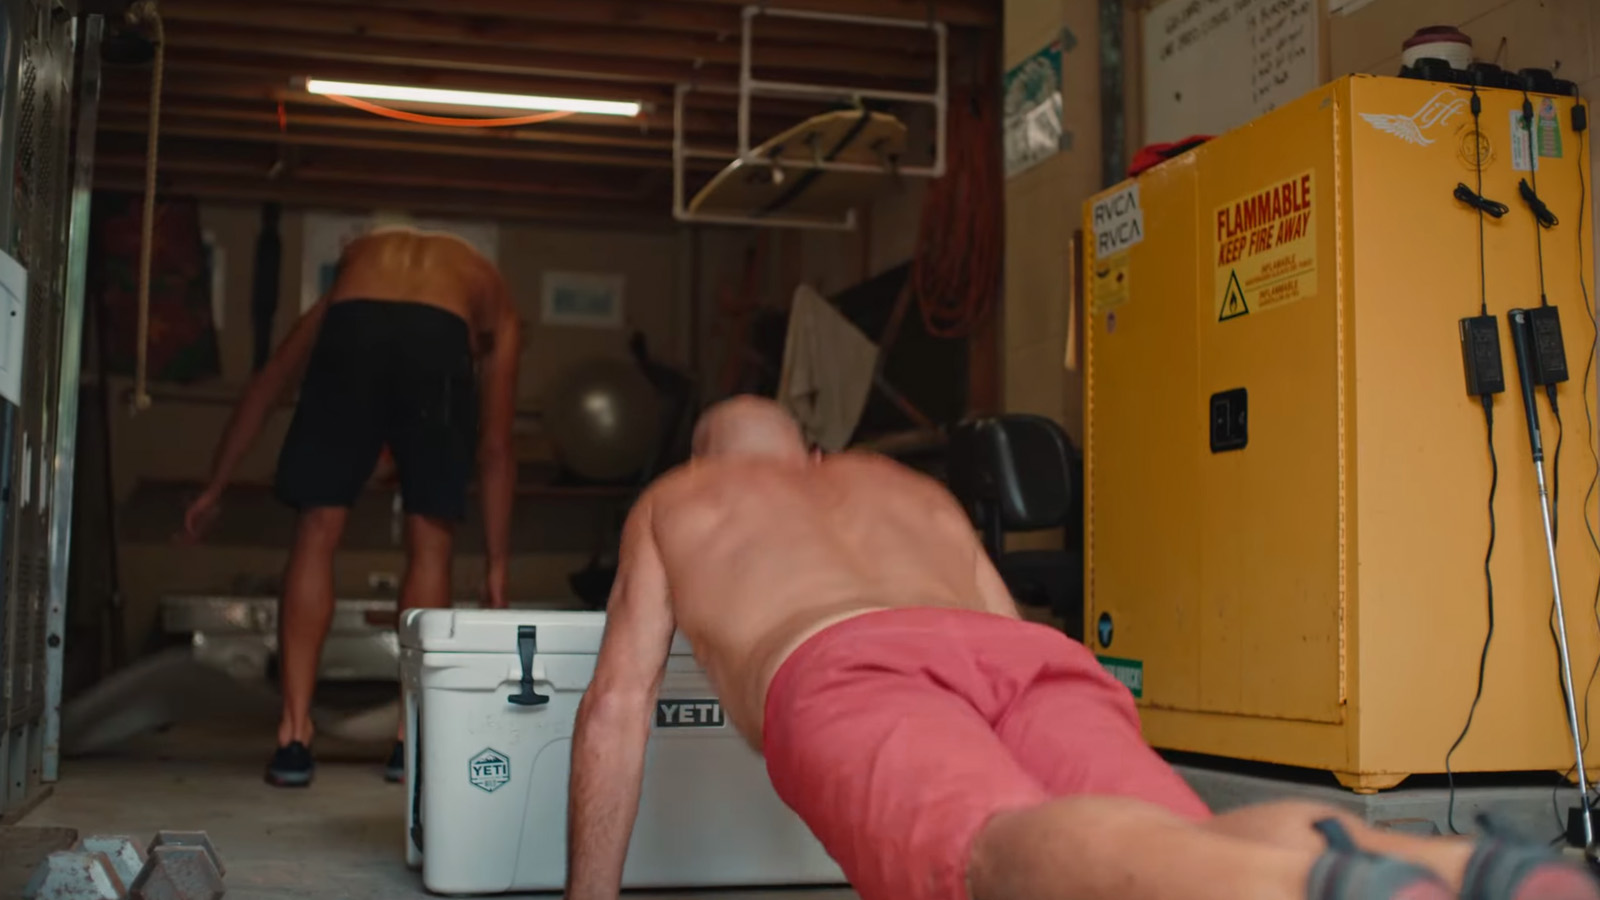 Despite being marketing content, product placement in YETI’s videos is typically treated with a very light touch.